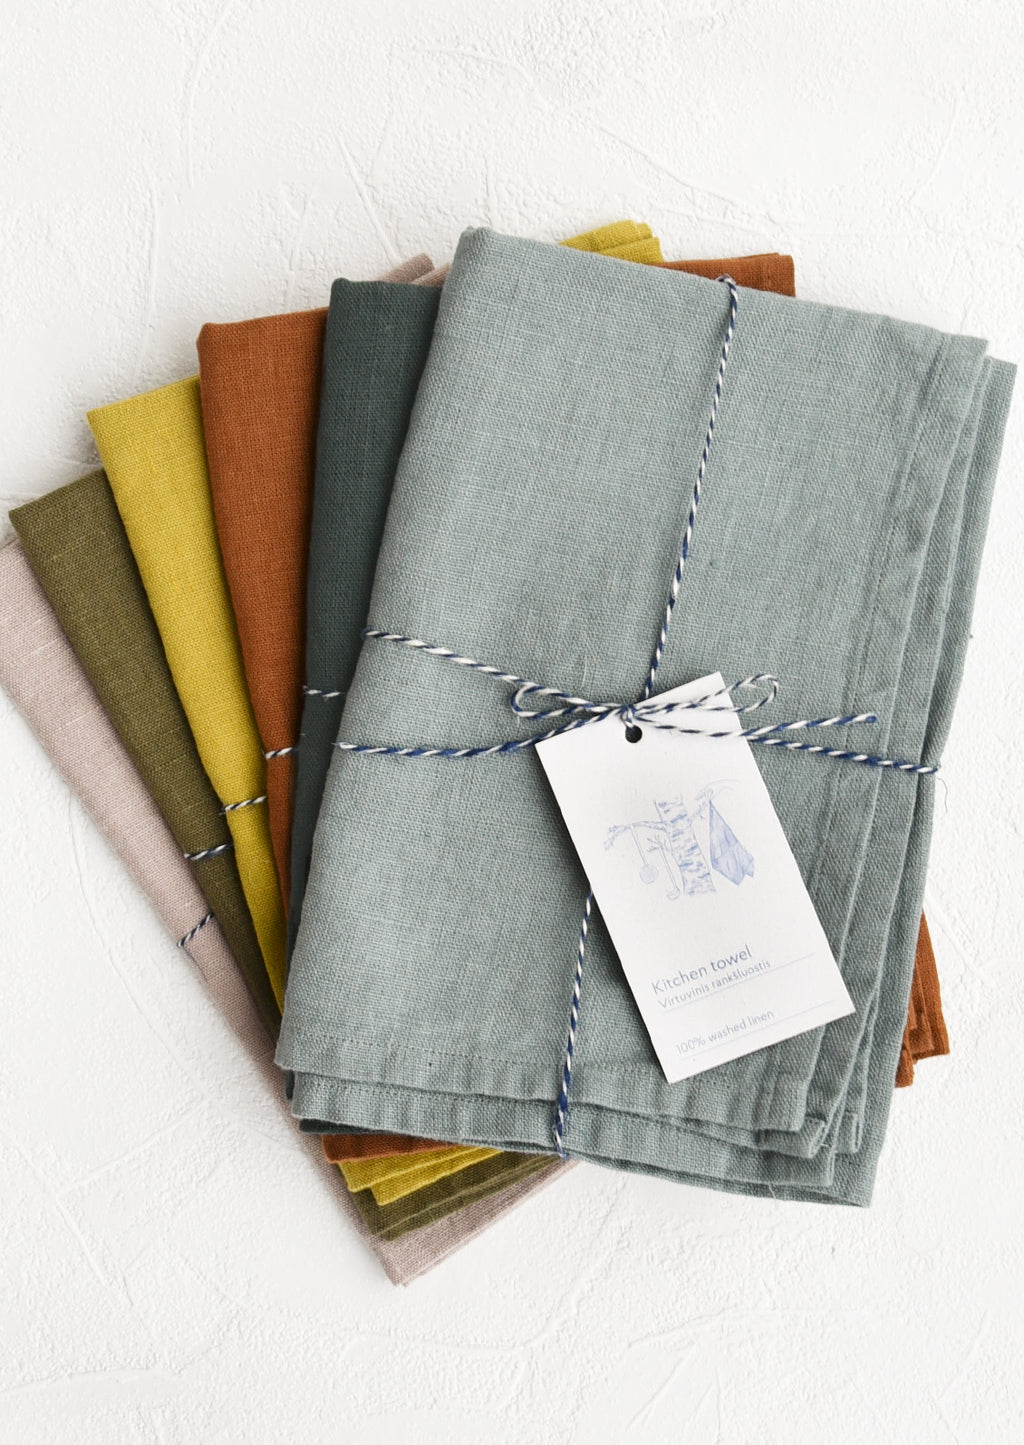 2: A stack of linen tea towels in assorted colors